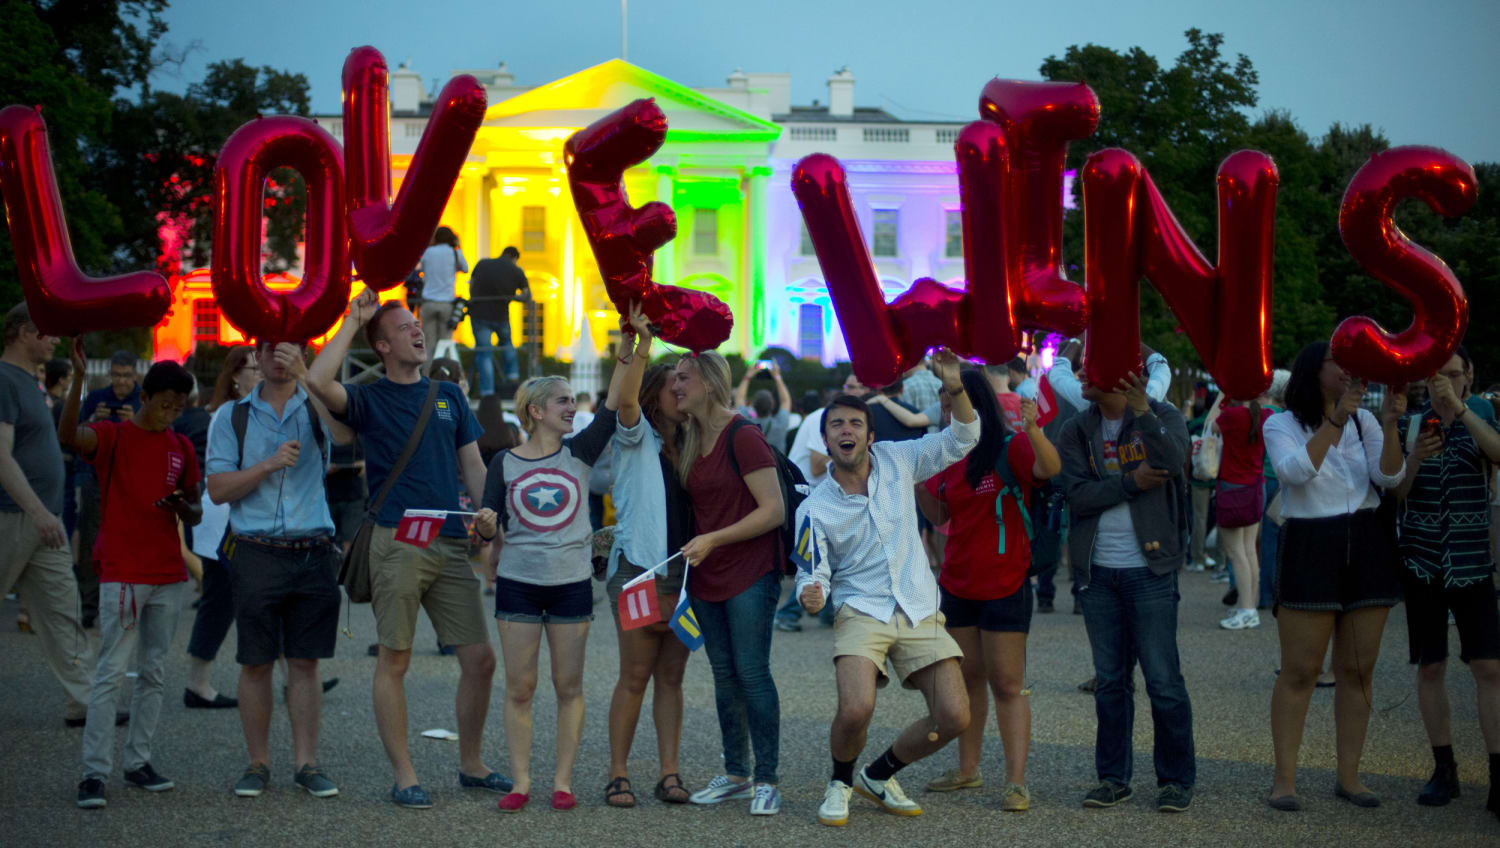 Democrats set votes to protect same-sex marriage and contraception, fearing Supreme Court